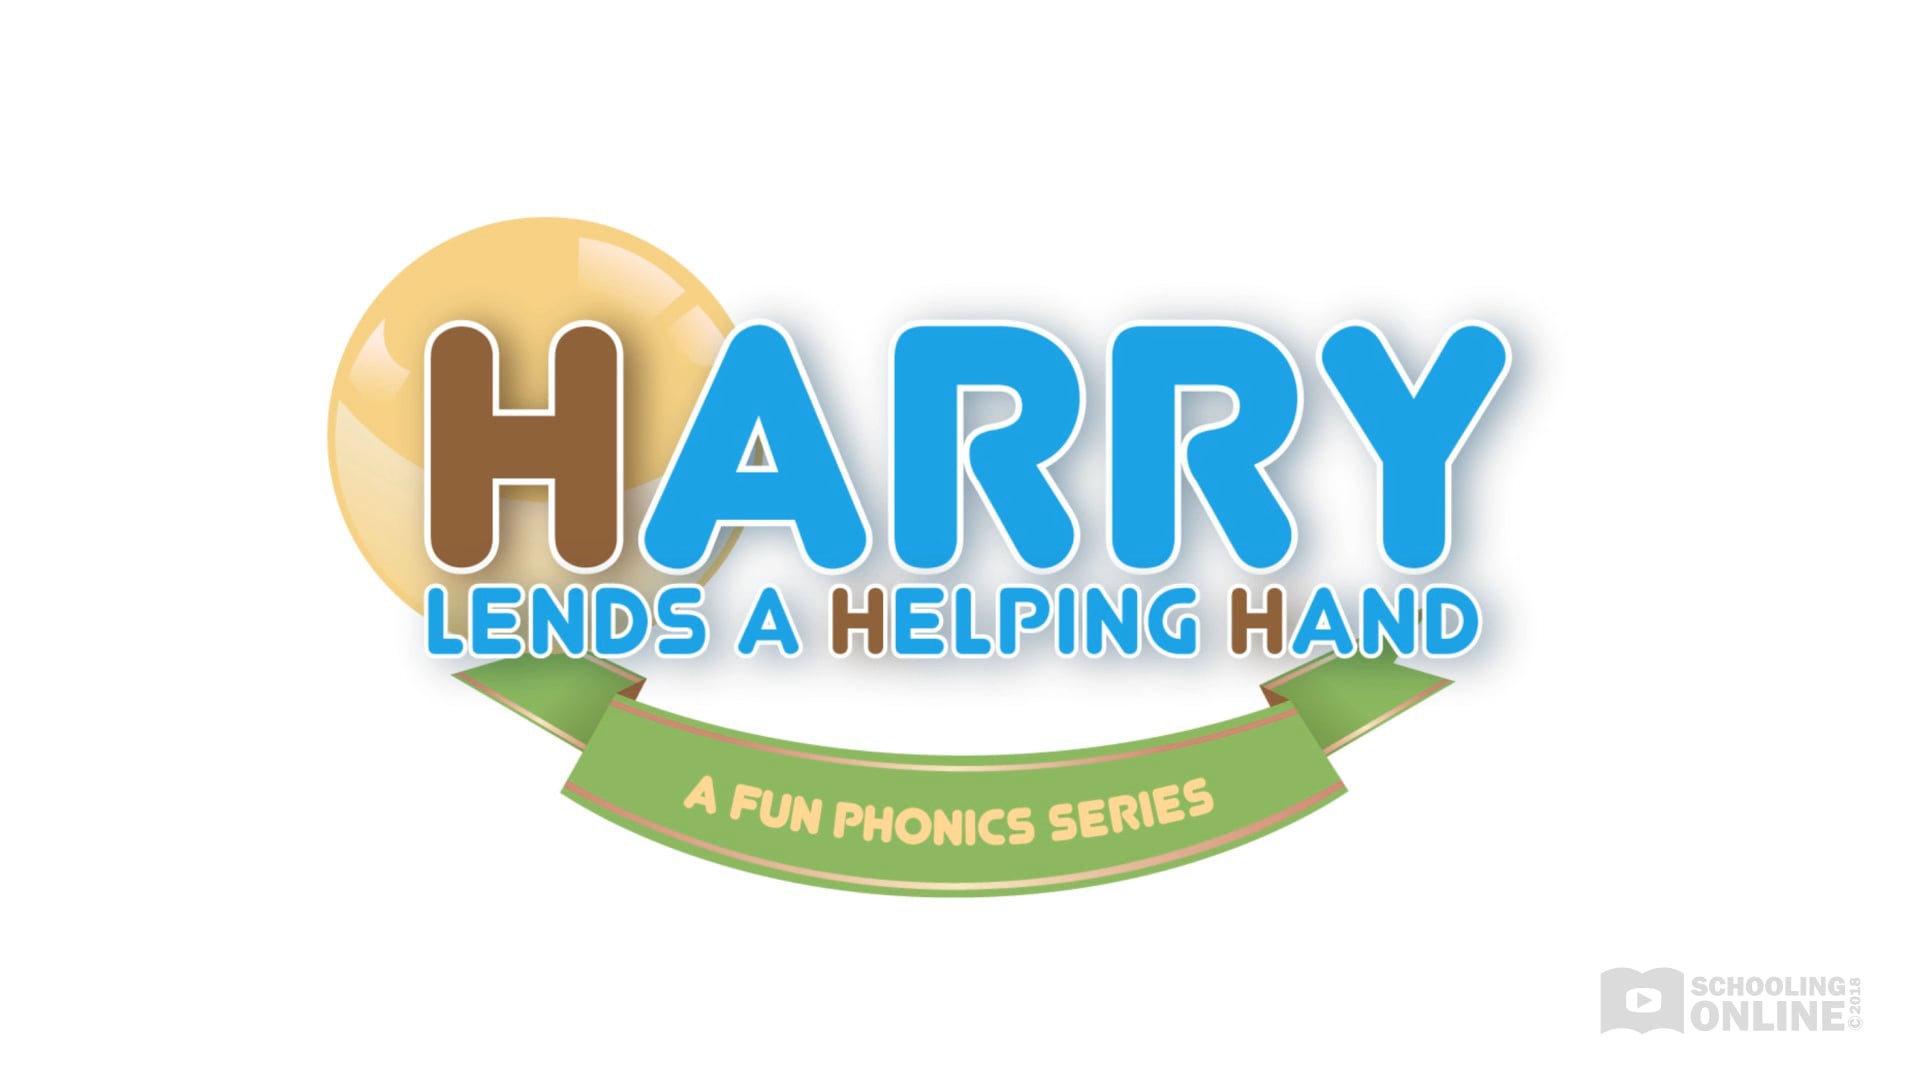 Harry Lends a Helping Hand